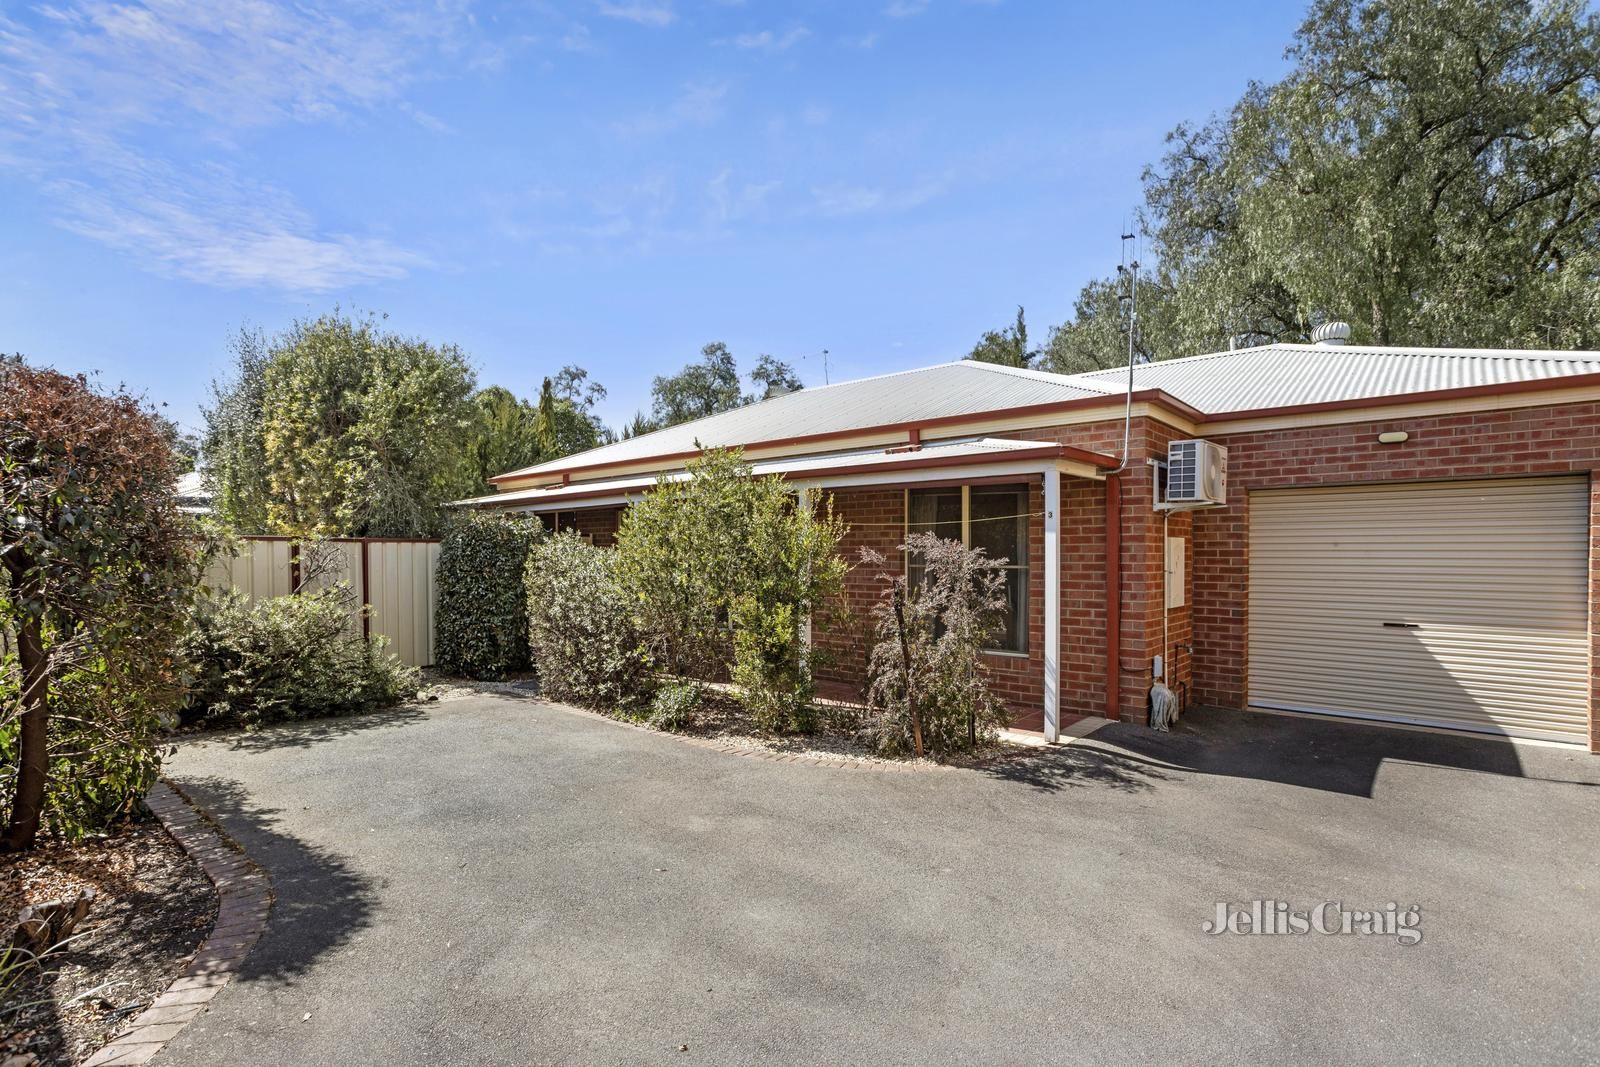 2 bedrooms House in 3/37 Johnstone Street CASTLEMAINE VIC, 3450